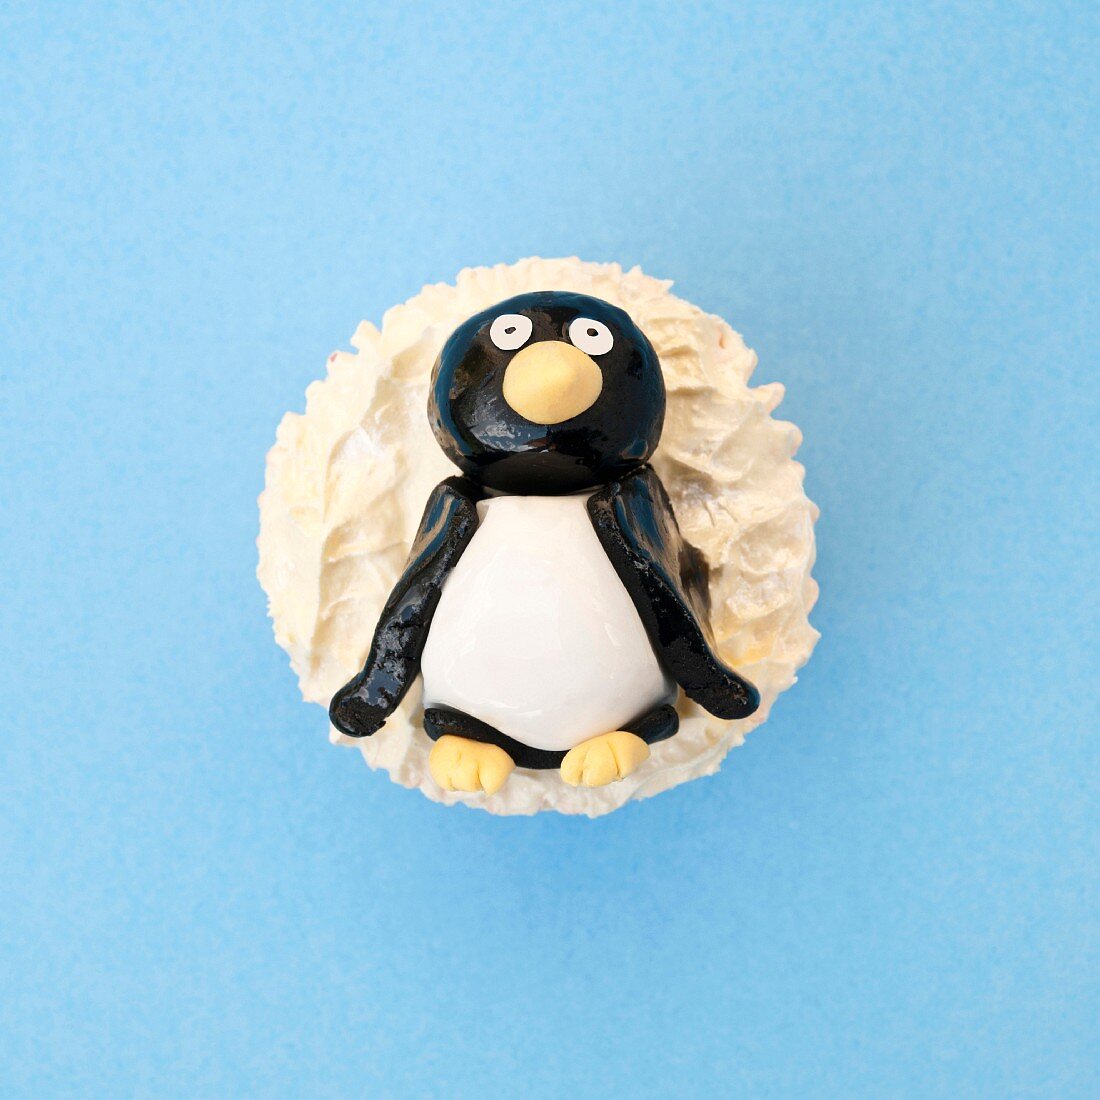 Cupcake topped with a sugar penguin